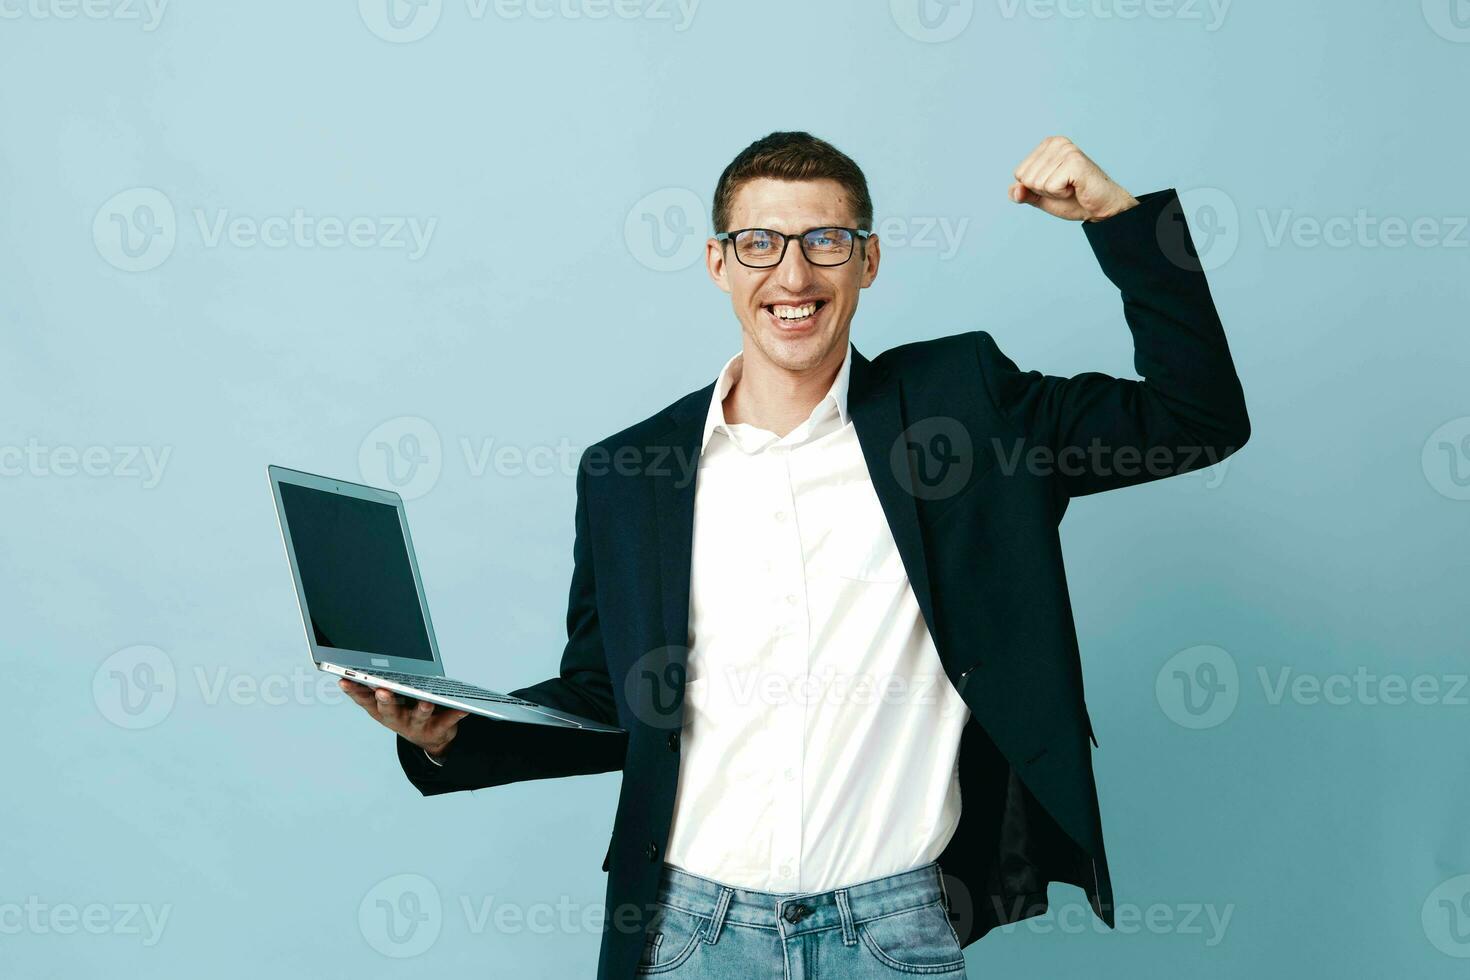 Background man young working excited adult professional computer businessman guy portrait person photo